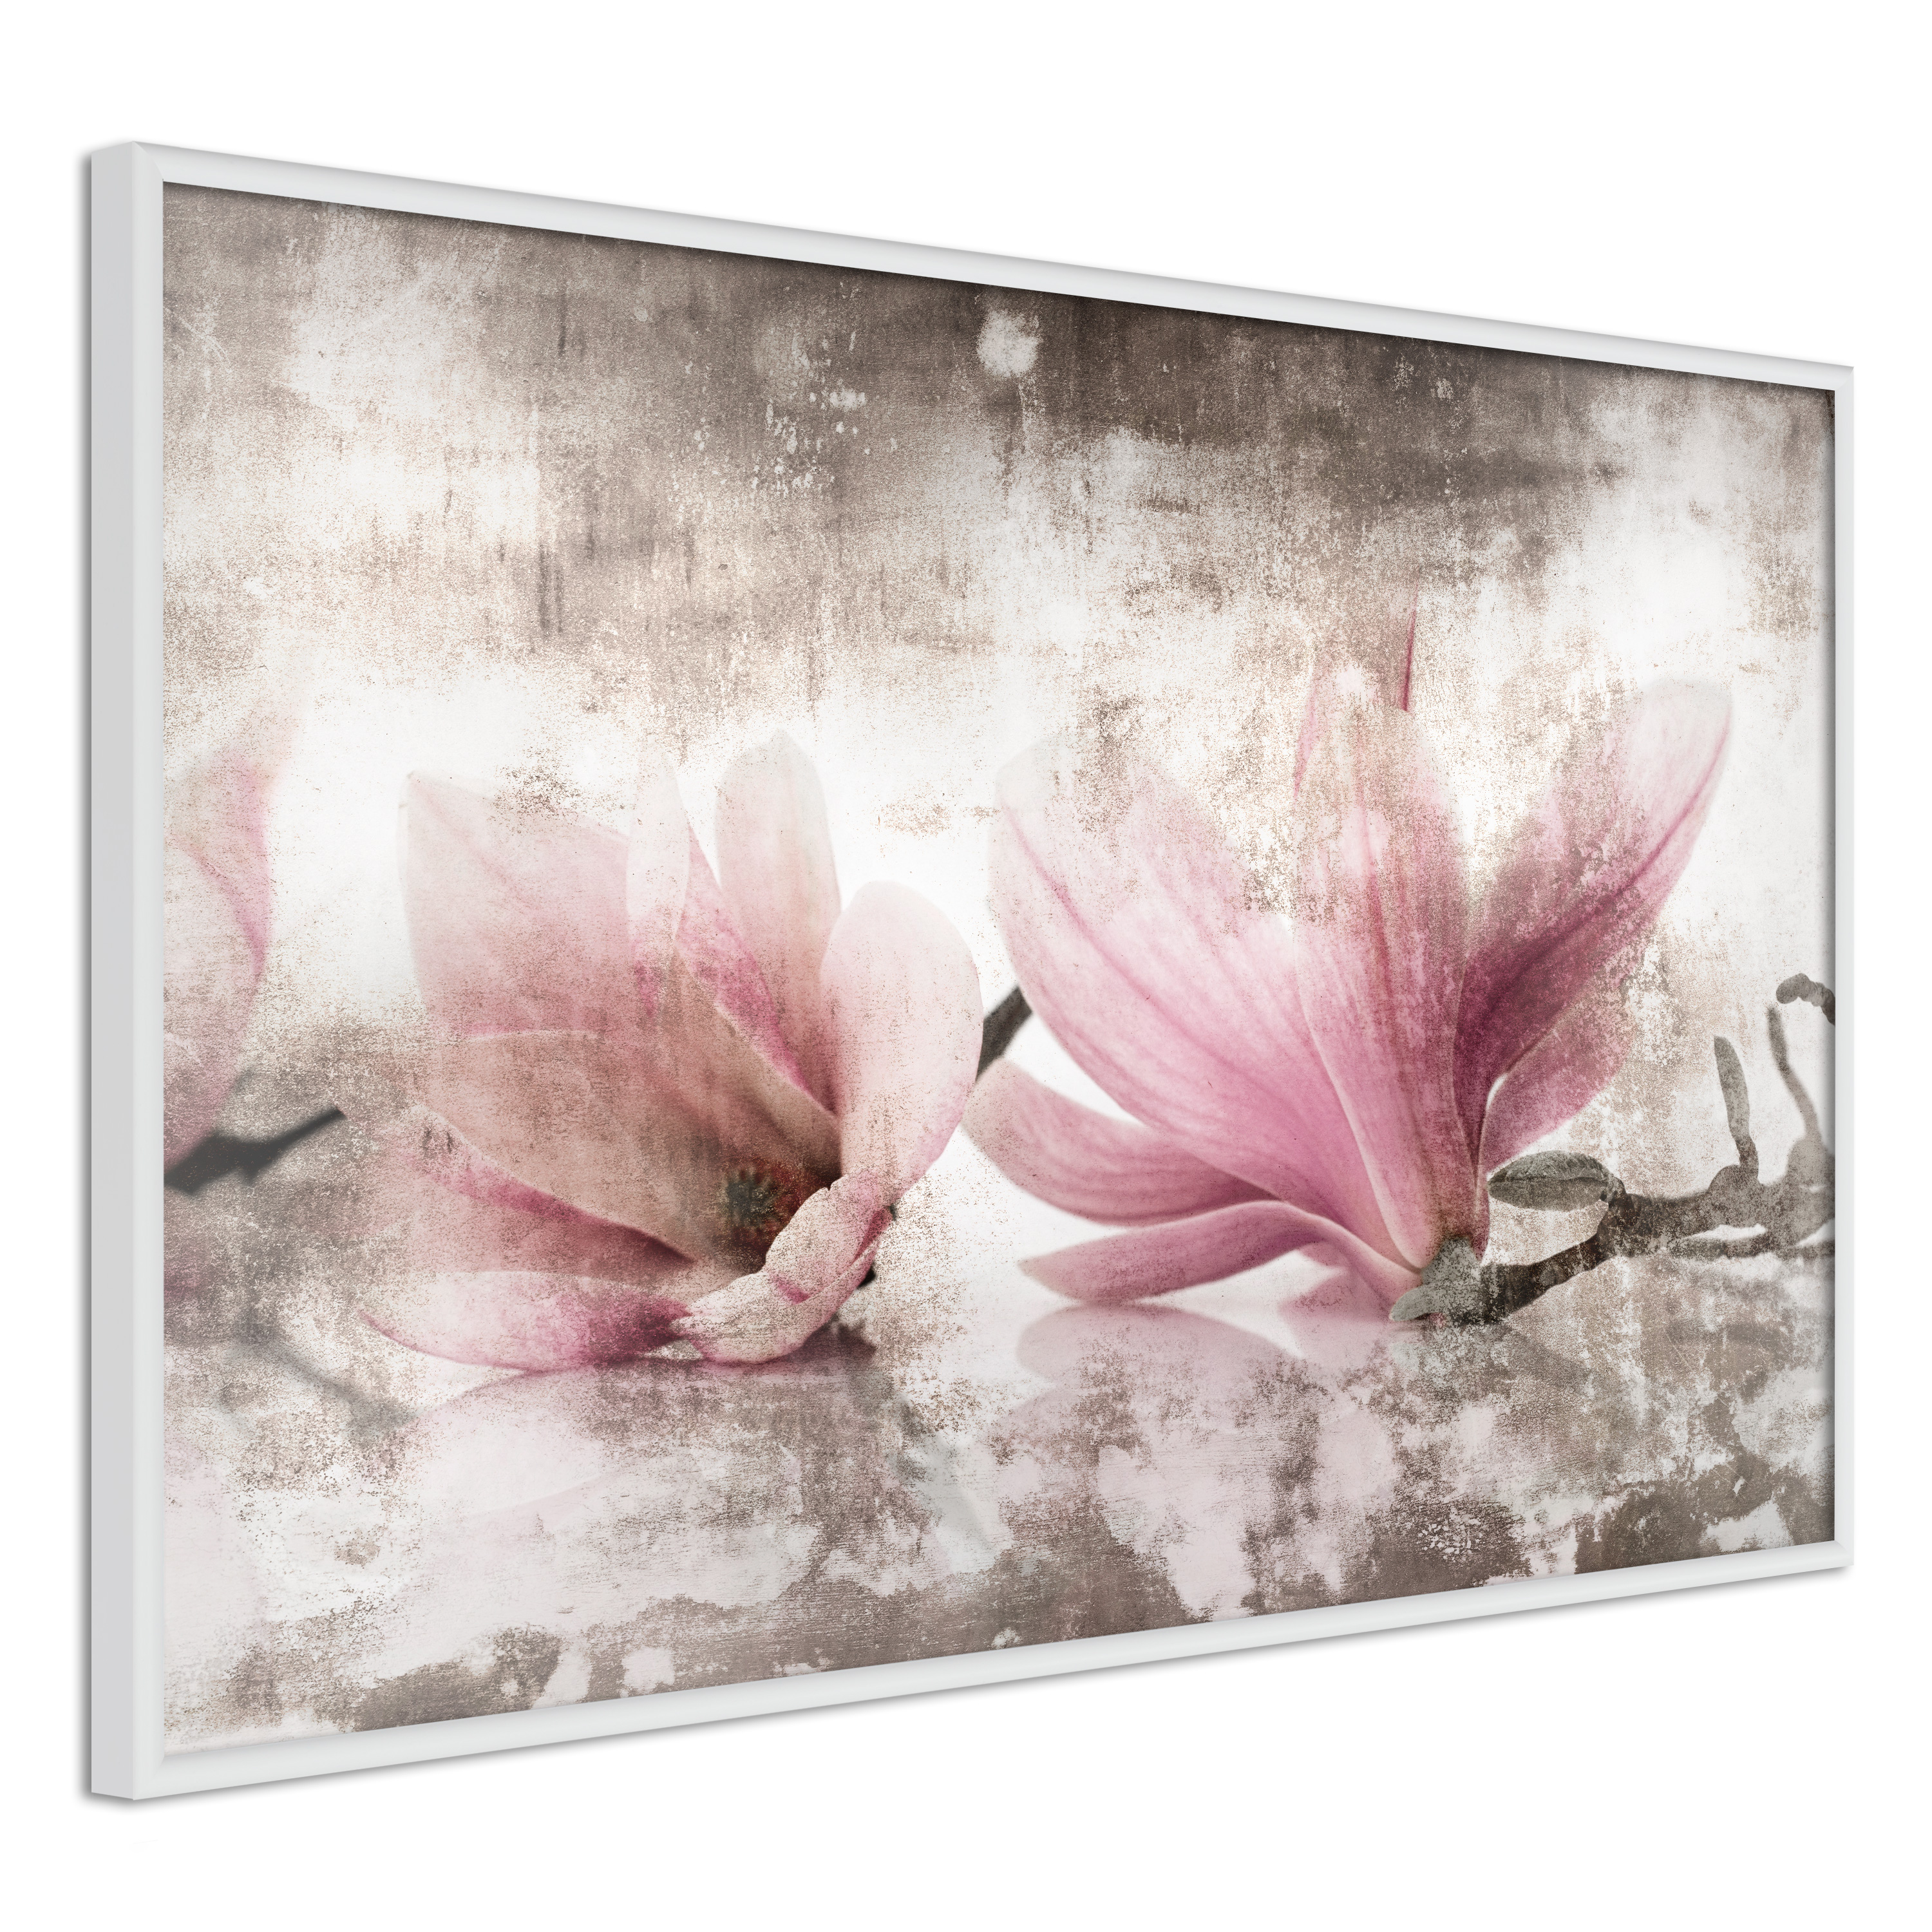 Poster - Picked Magnolias - 60x40